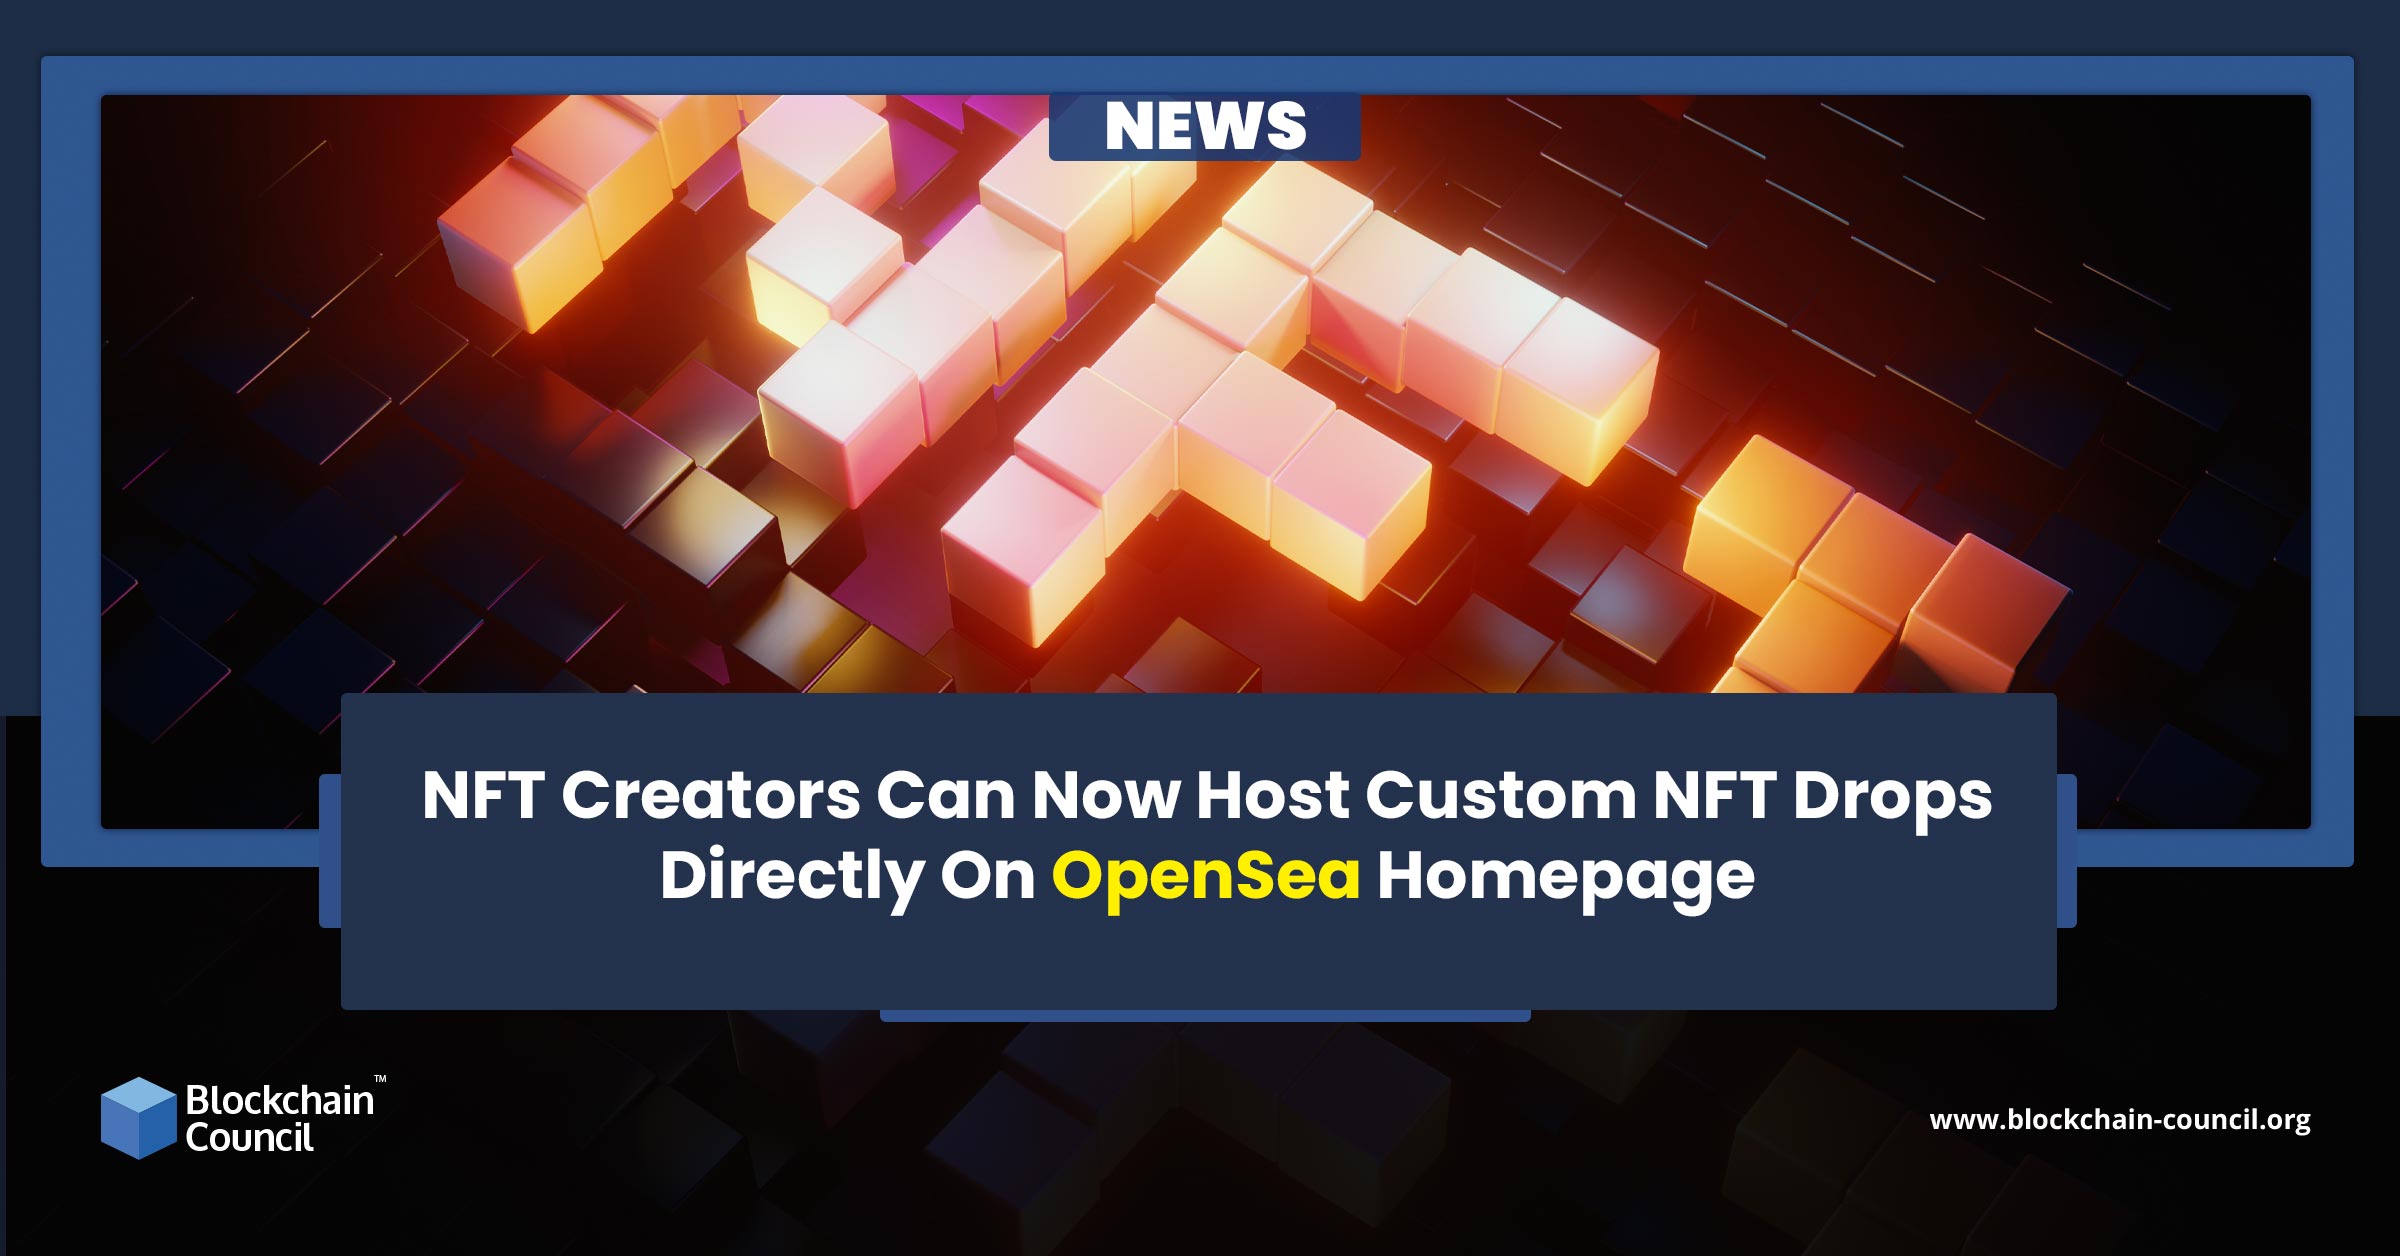 NFT Marketplace OpenSea Says Emails Exposed in Data Breach - CNET